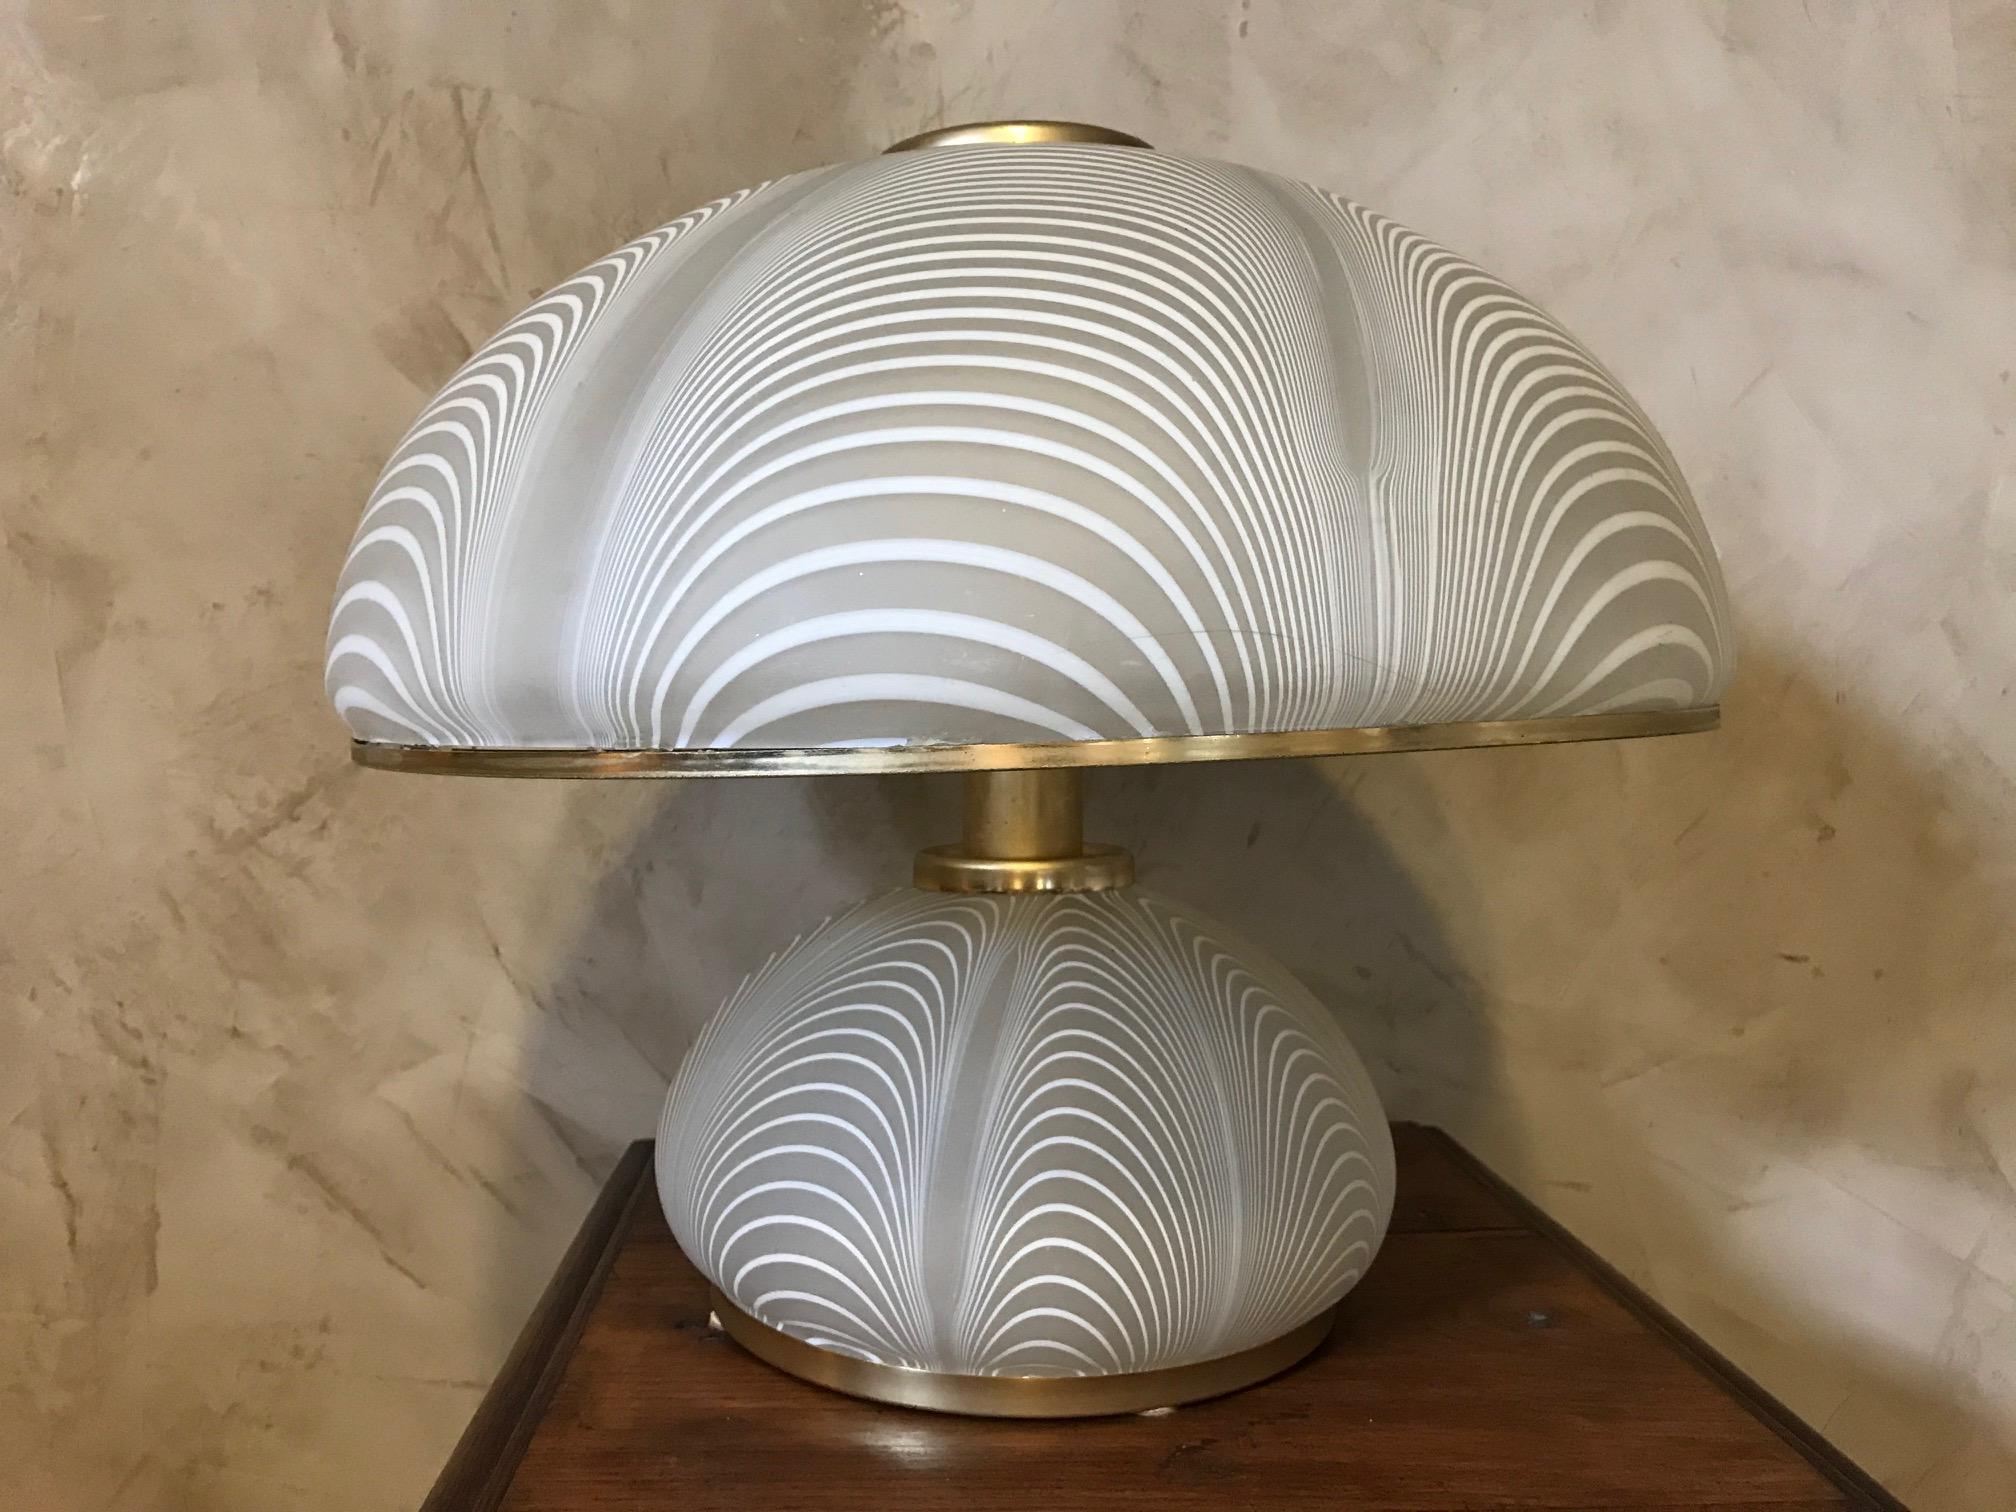 Exceptional Murano glass table lamp designed by Paolo Venini in the 1970s.
This lamp has a mushroom shape and made of mouth-blown white and clear striped art glass with very fine brass elements. The lampshade is also rimmed with brass.
There are